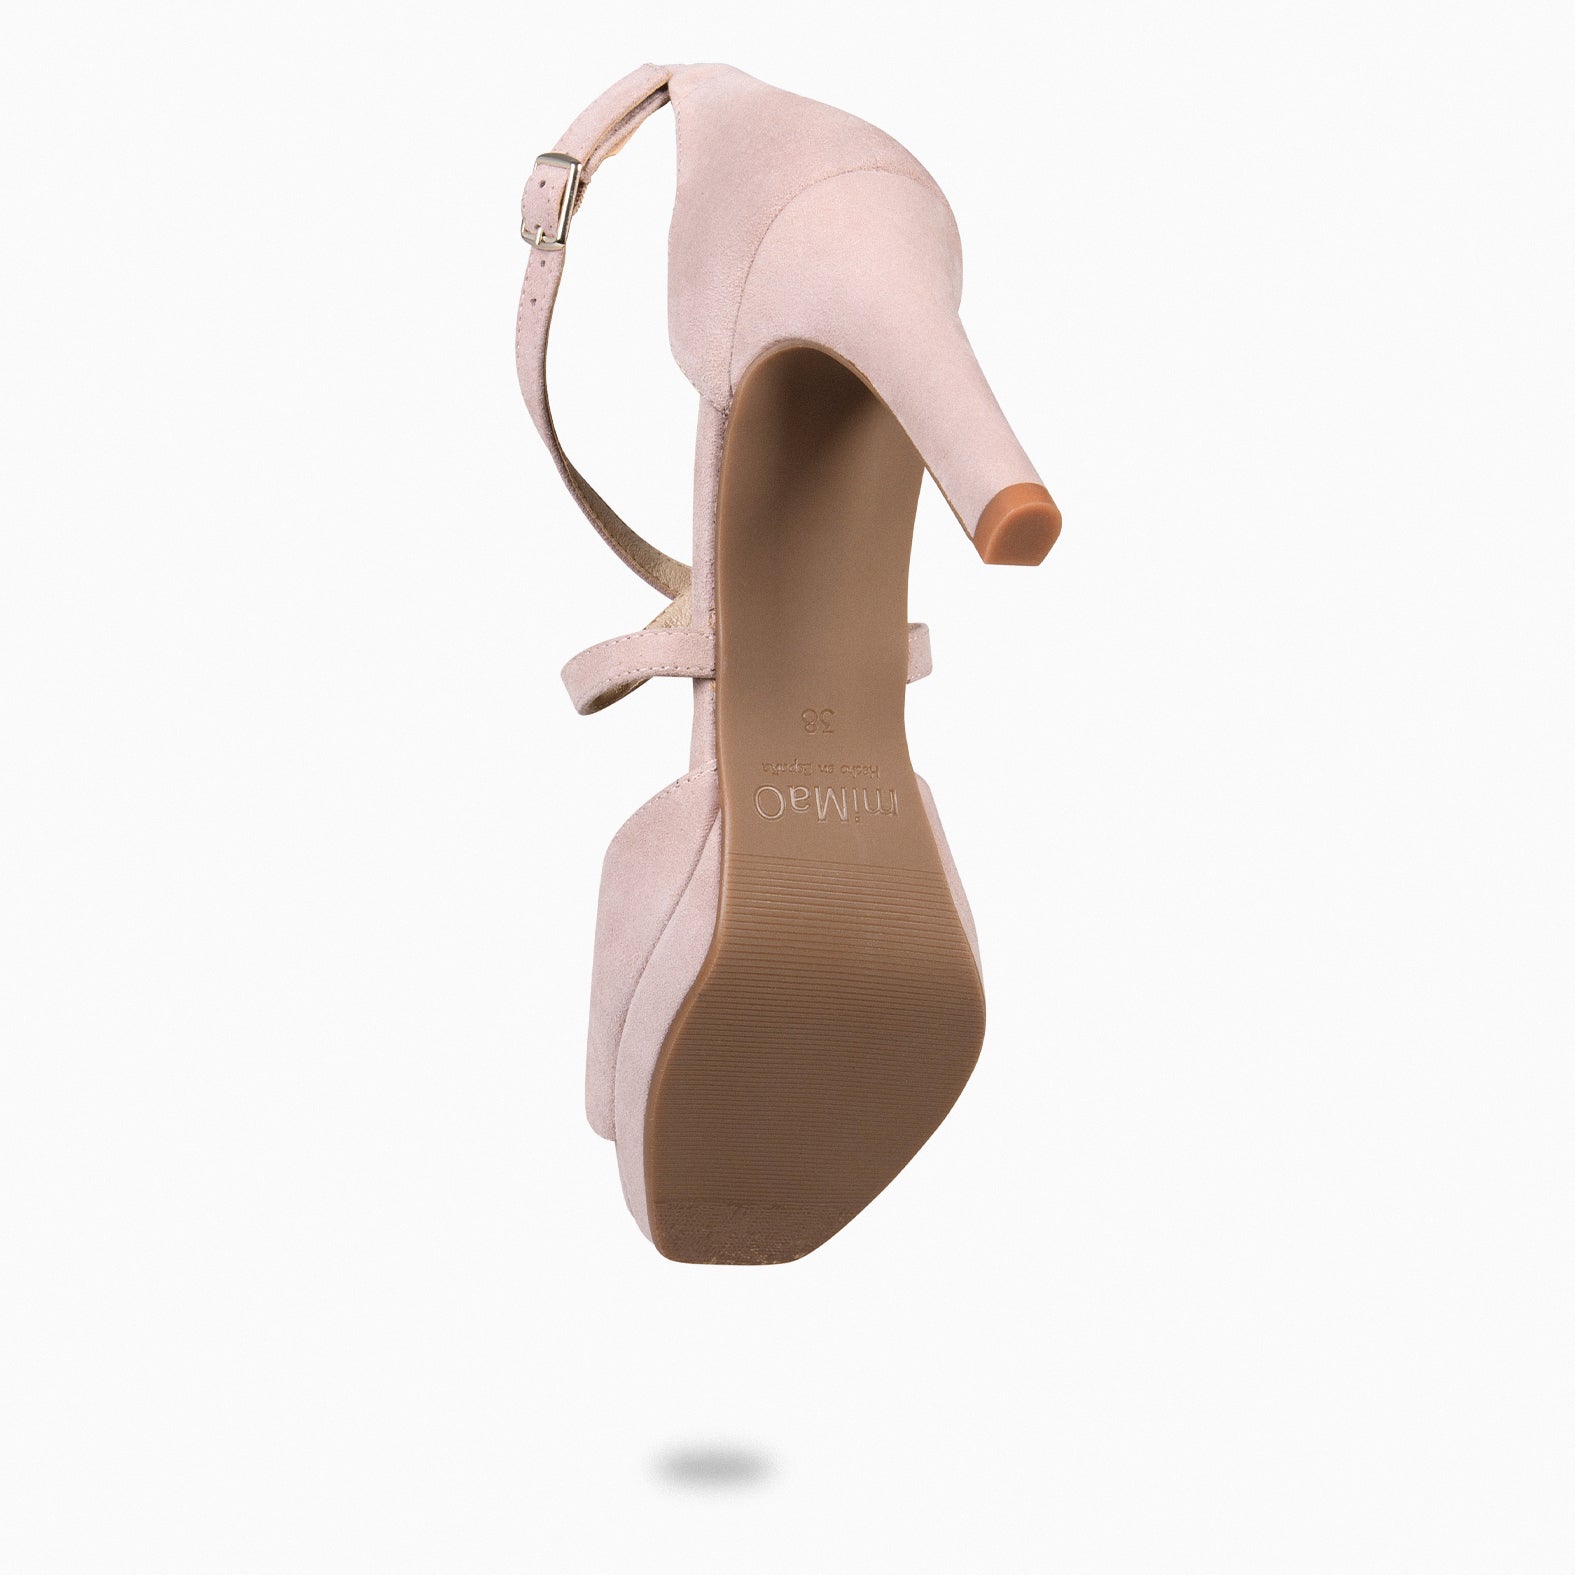 ROSSA - NUDE party sandals with heel